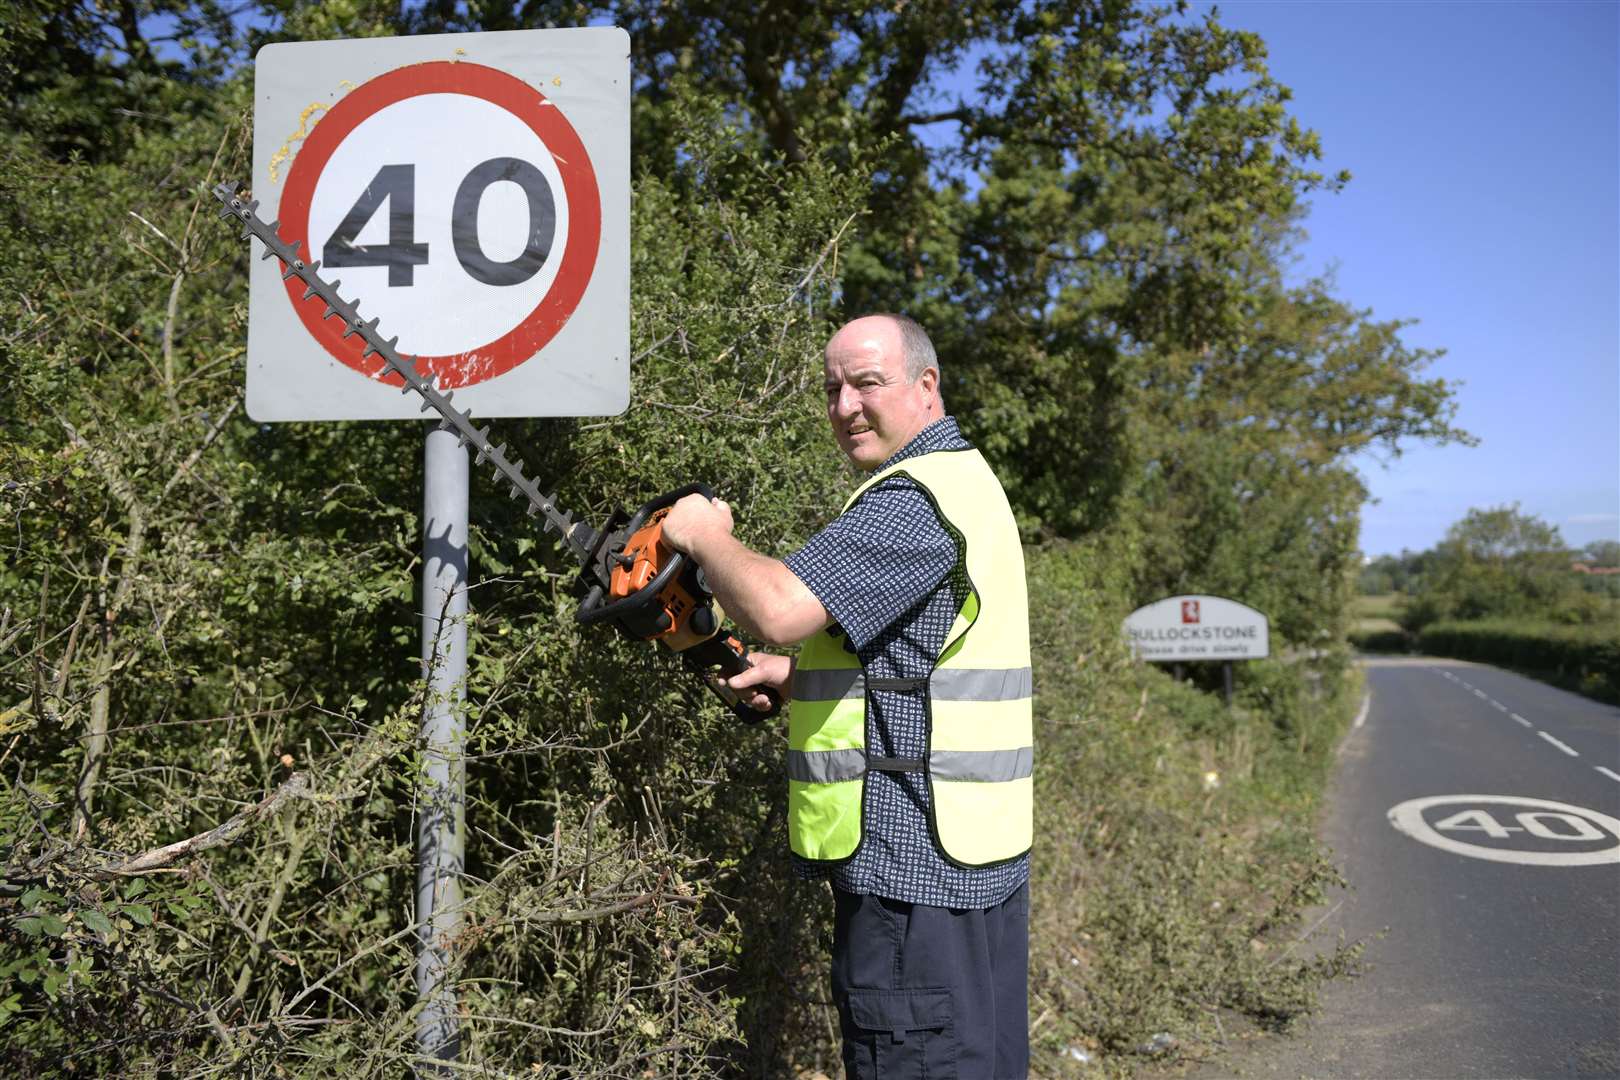 Joe Ellis has been cutting bushes obscuring view of road signs along Bullockstone Road for 20 years. Picture: Barry Goodwin